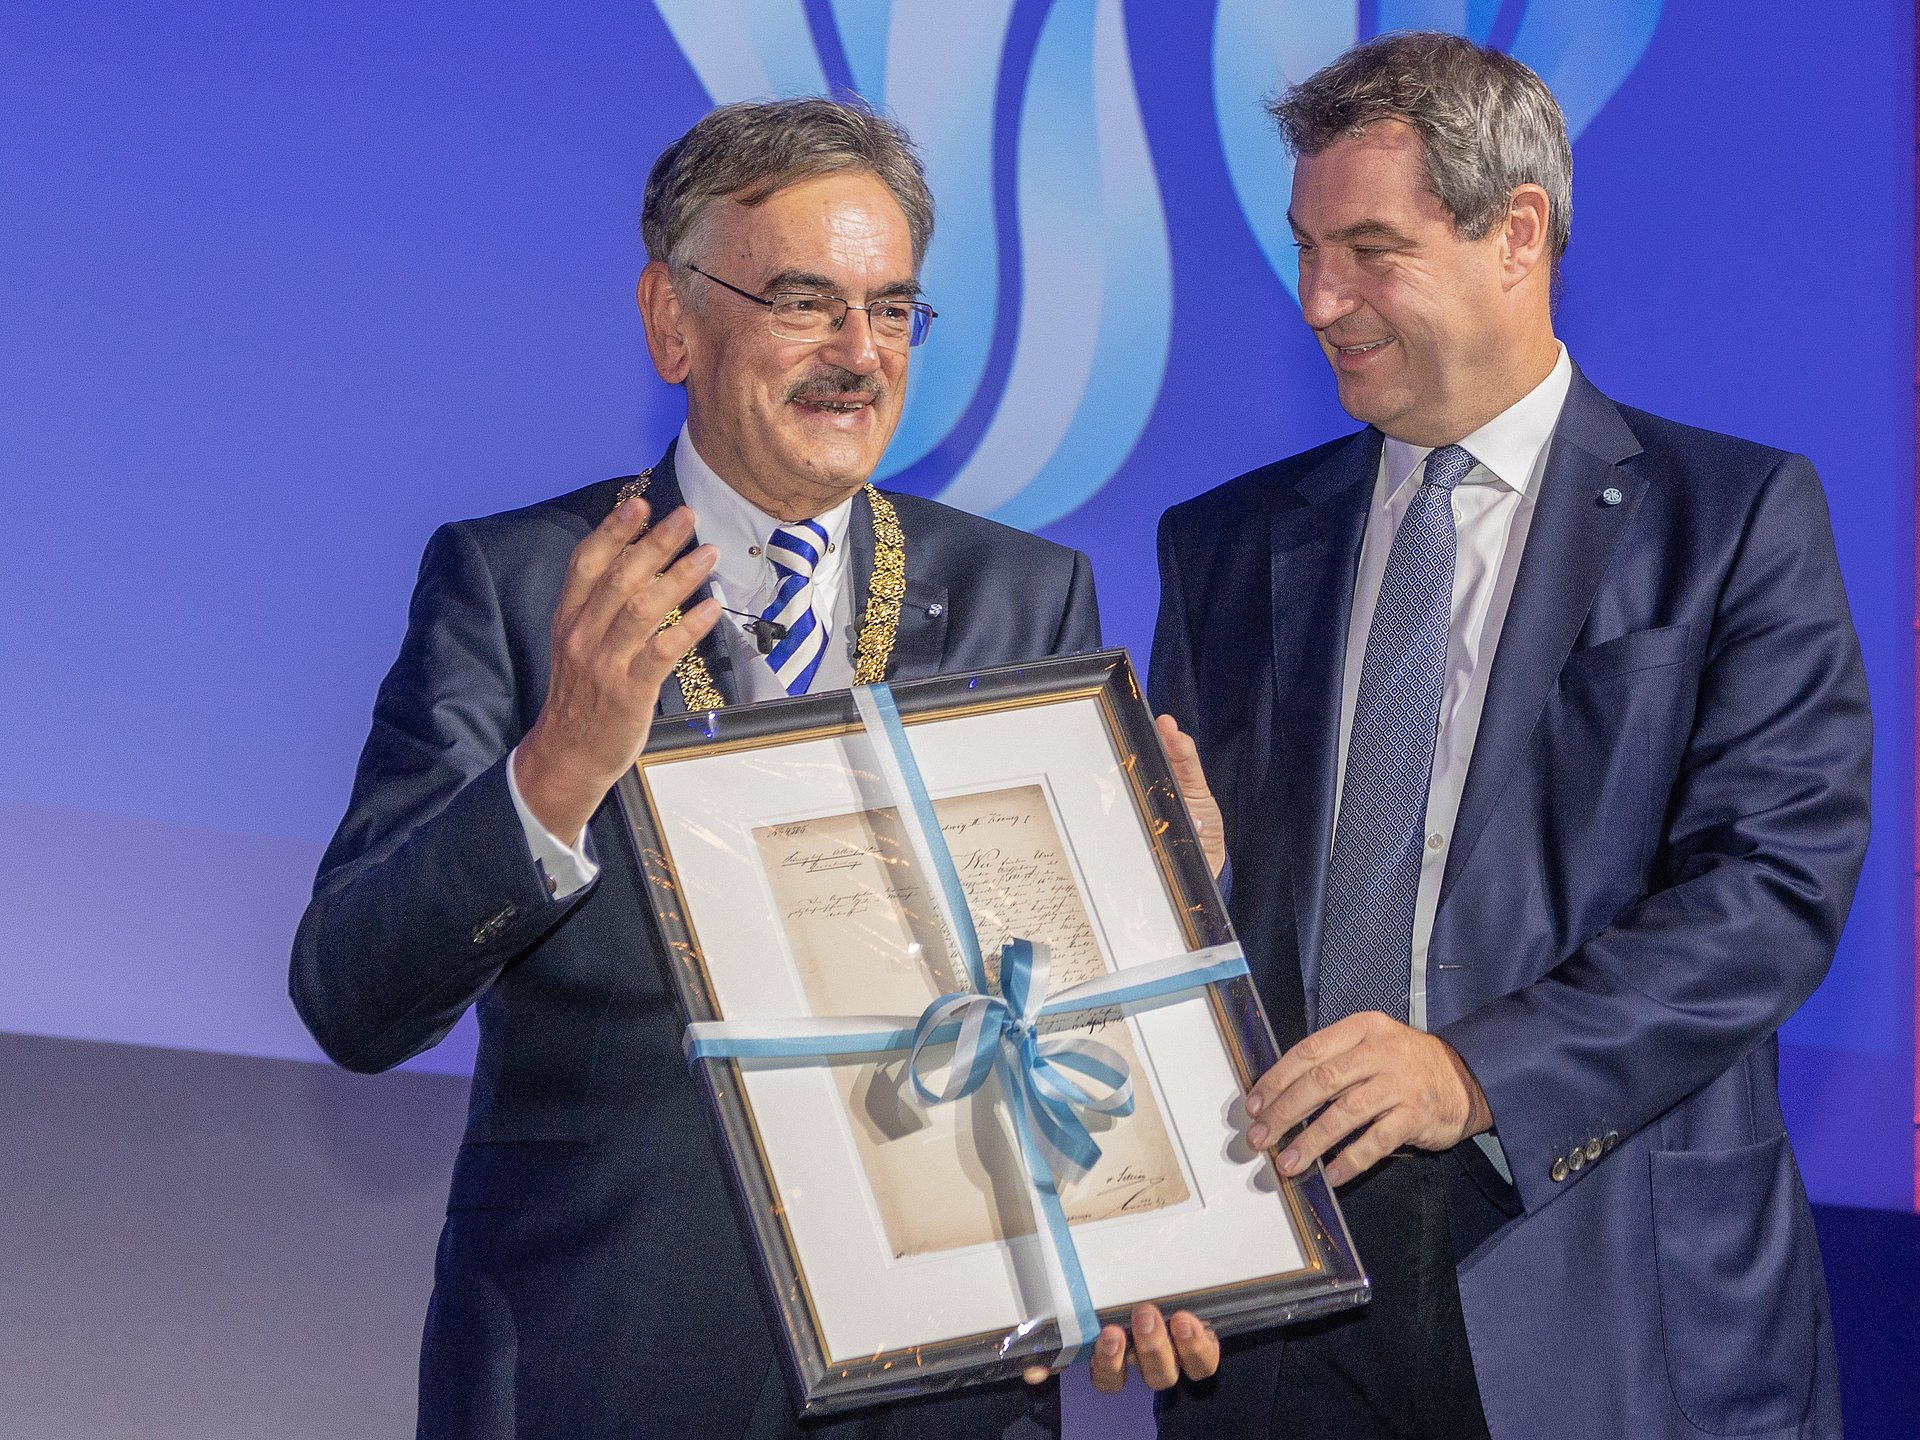 Minister President Markus Söder presents a reproduction of the charter of today's TUM to Wolfgang A. Herrmann.